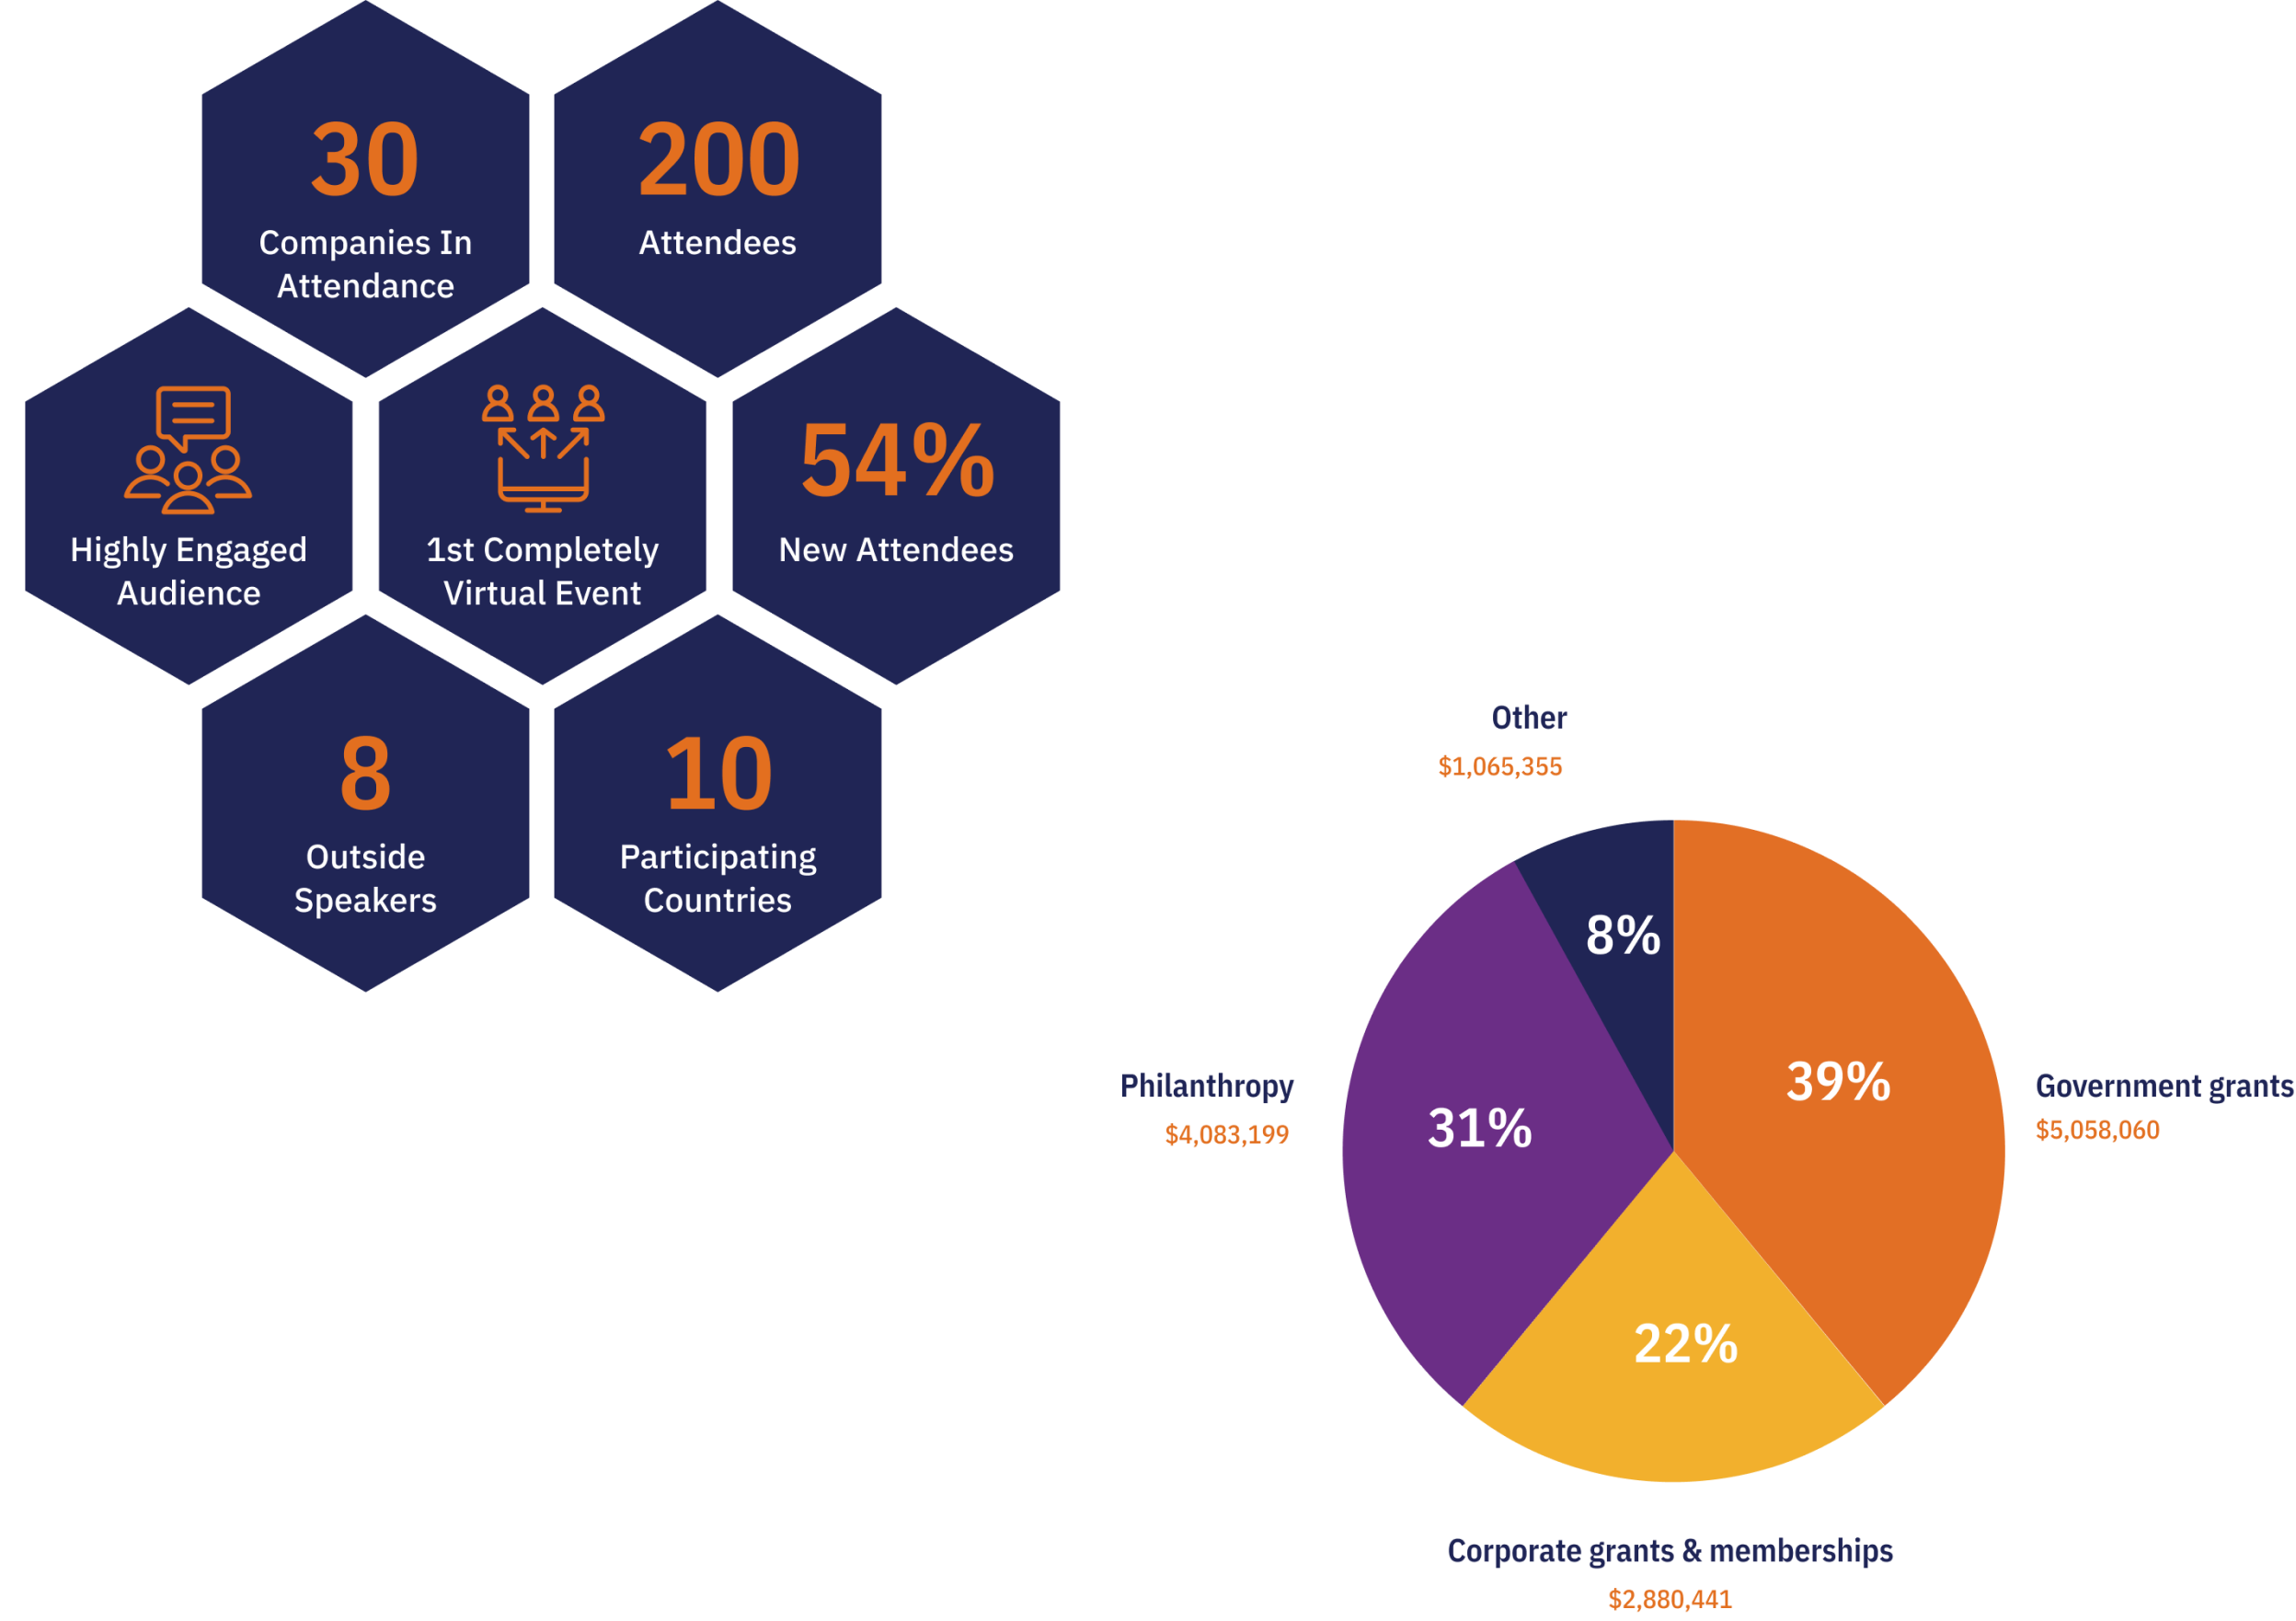 Various statistics from the report displayed in orange text on dark blue hexagons, and a pie chart